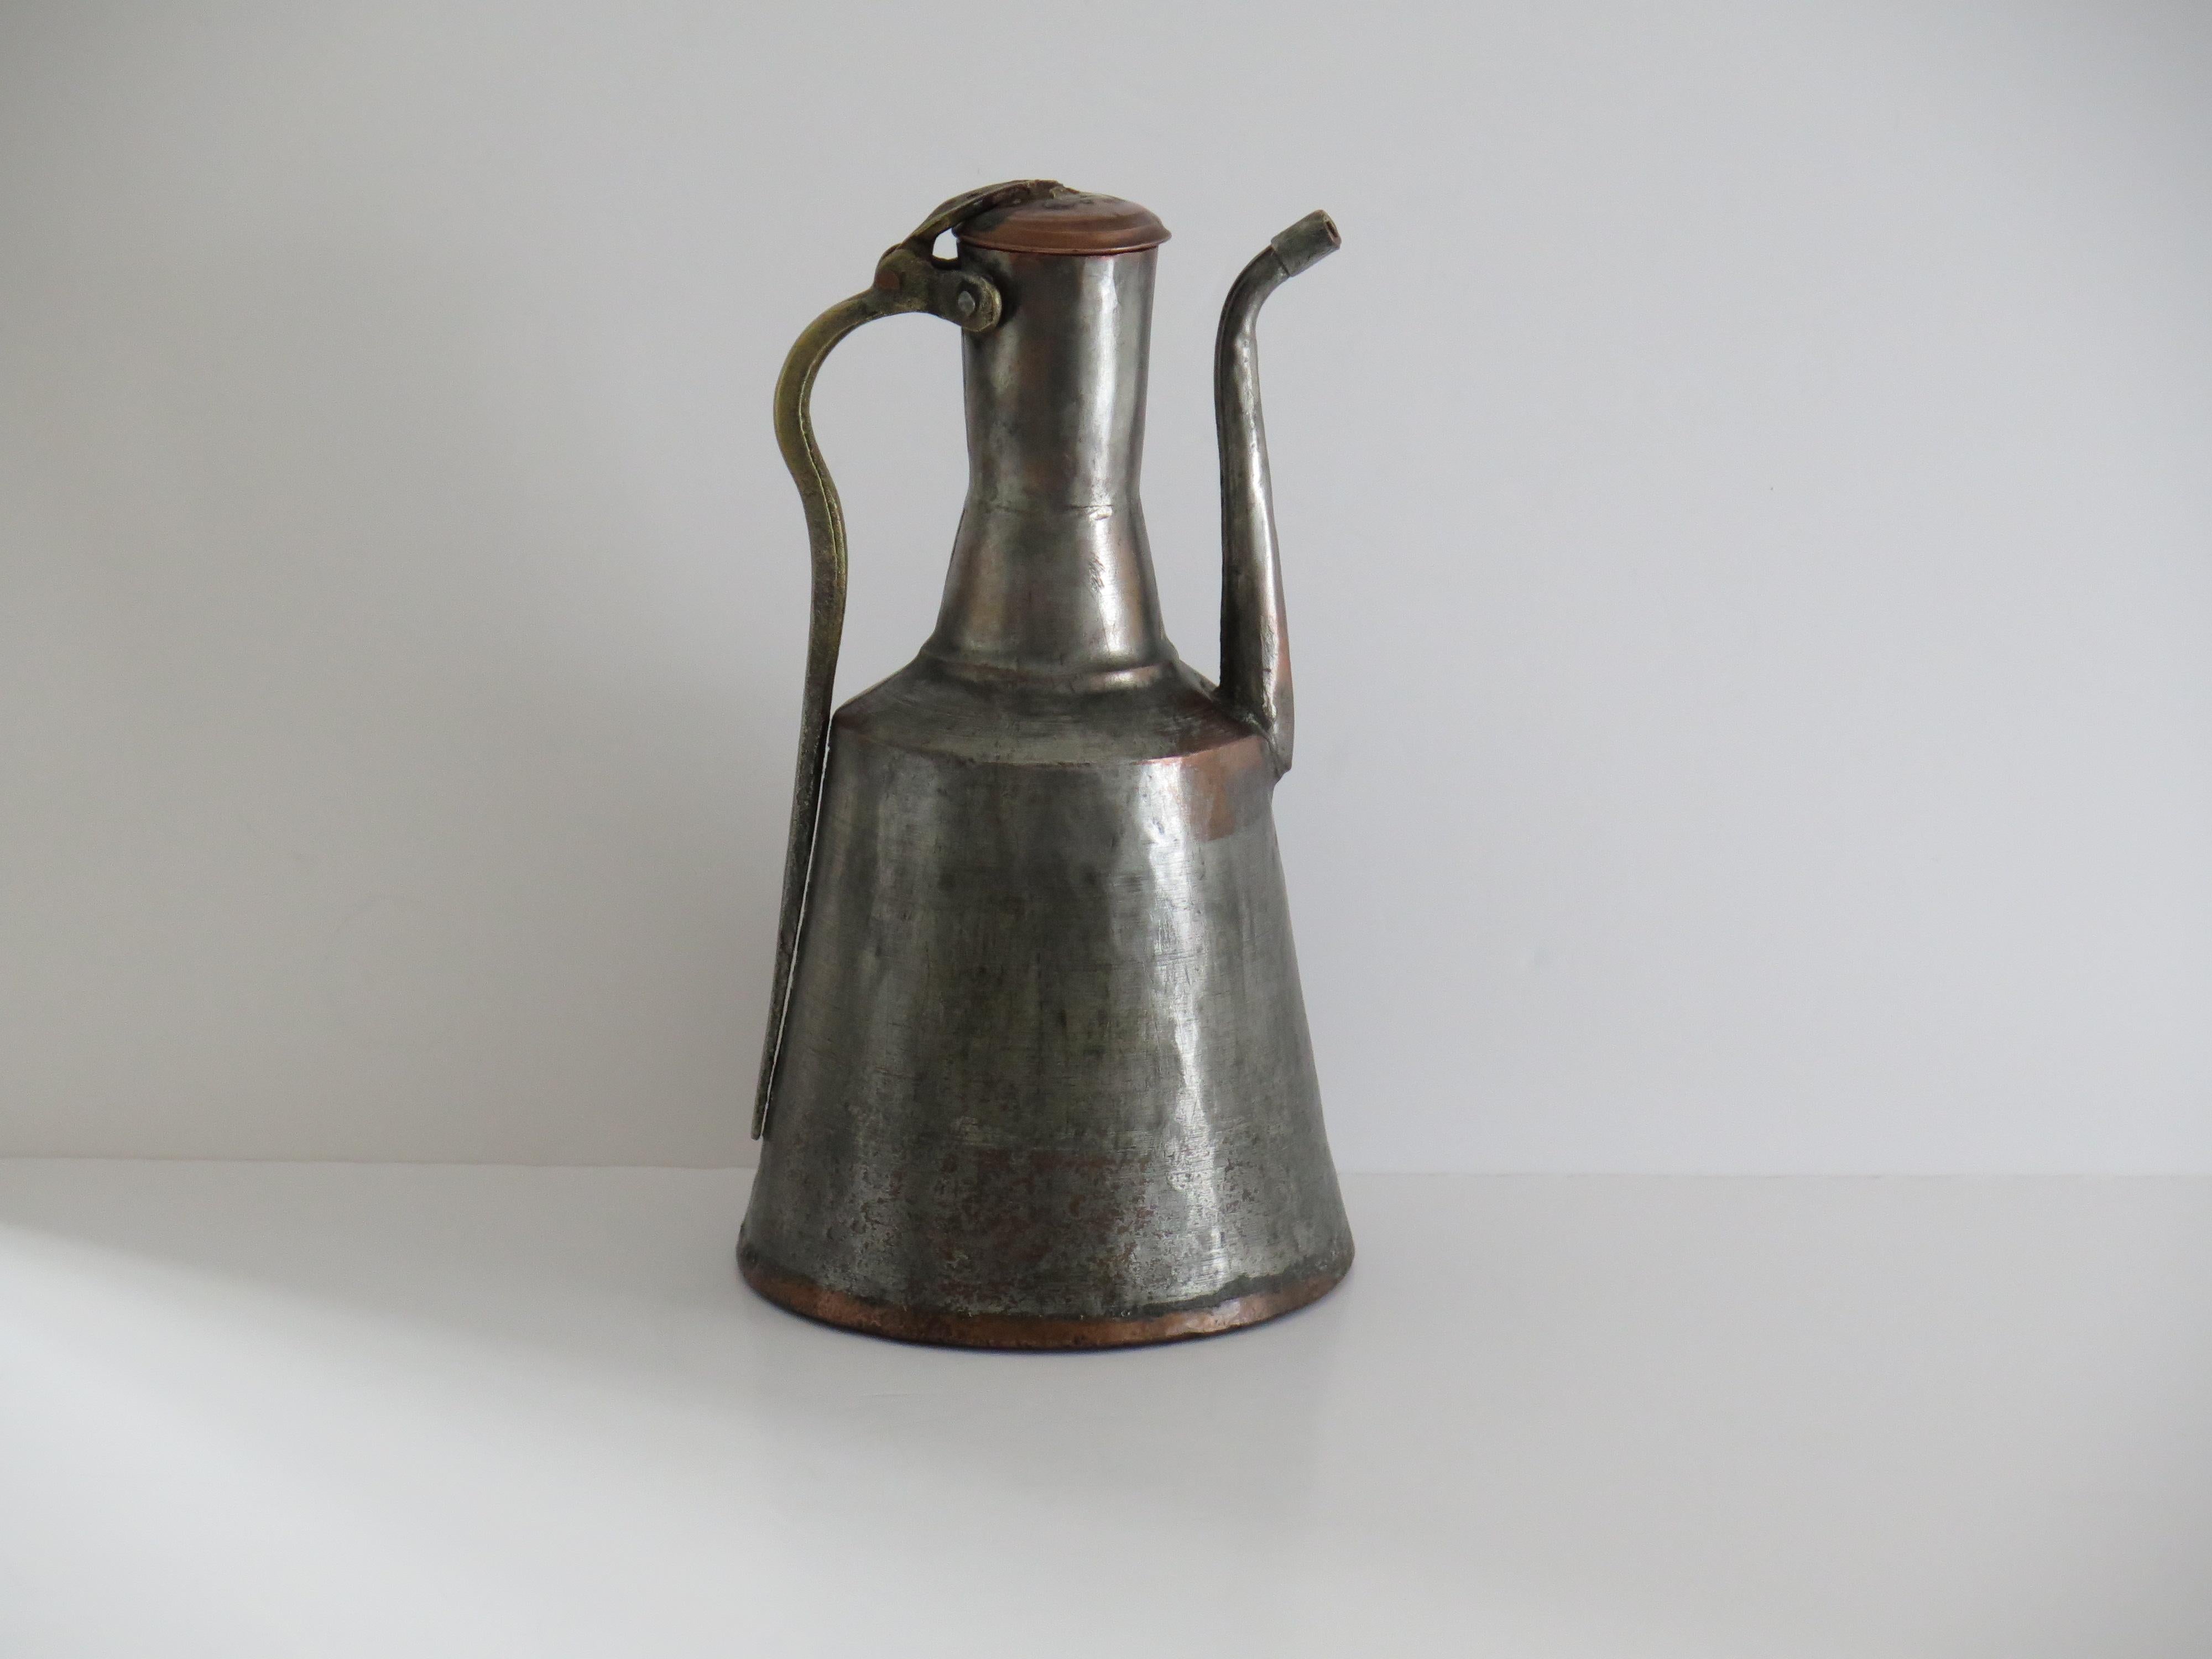 This is a handmade Ewer / Pitcher made from tinned copper and dating to the early 19th Century. It is of Islamic influence made in the Middle East, probably Turkey.

This piece is all hand made from non-ferrous metals, mainly copper and some brass.